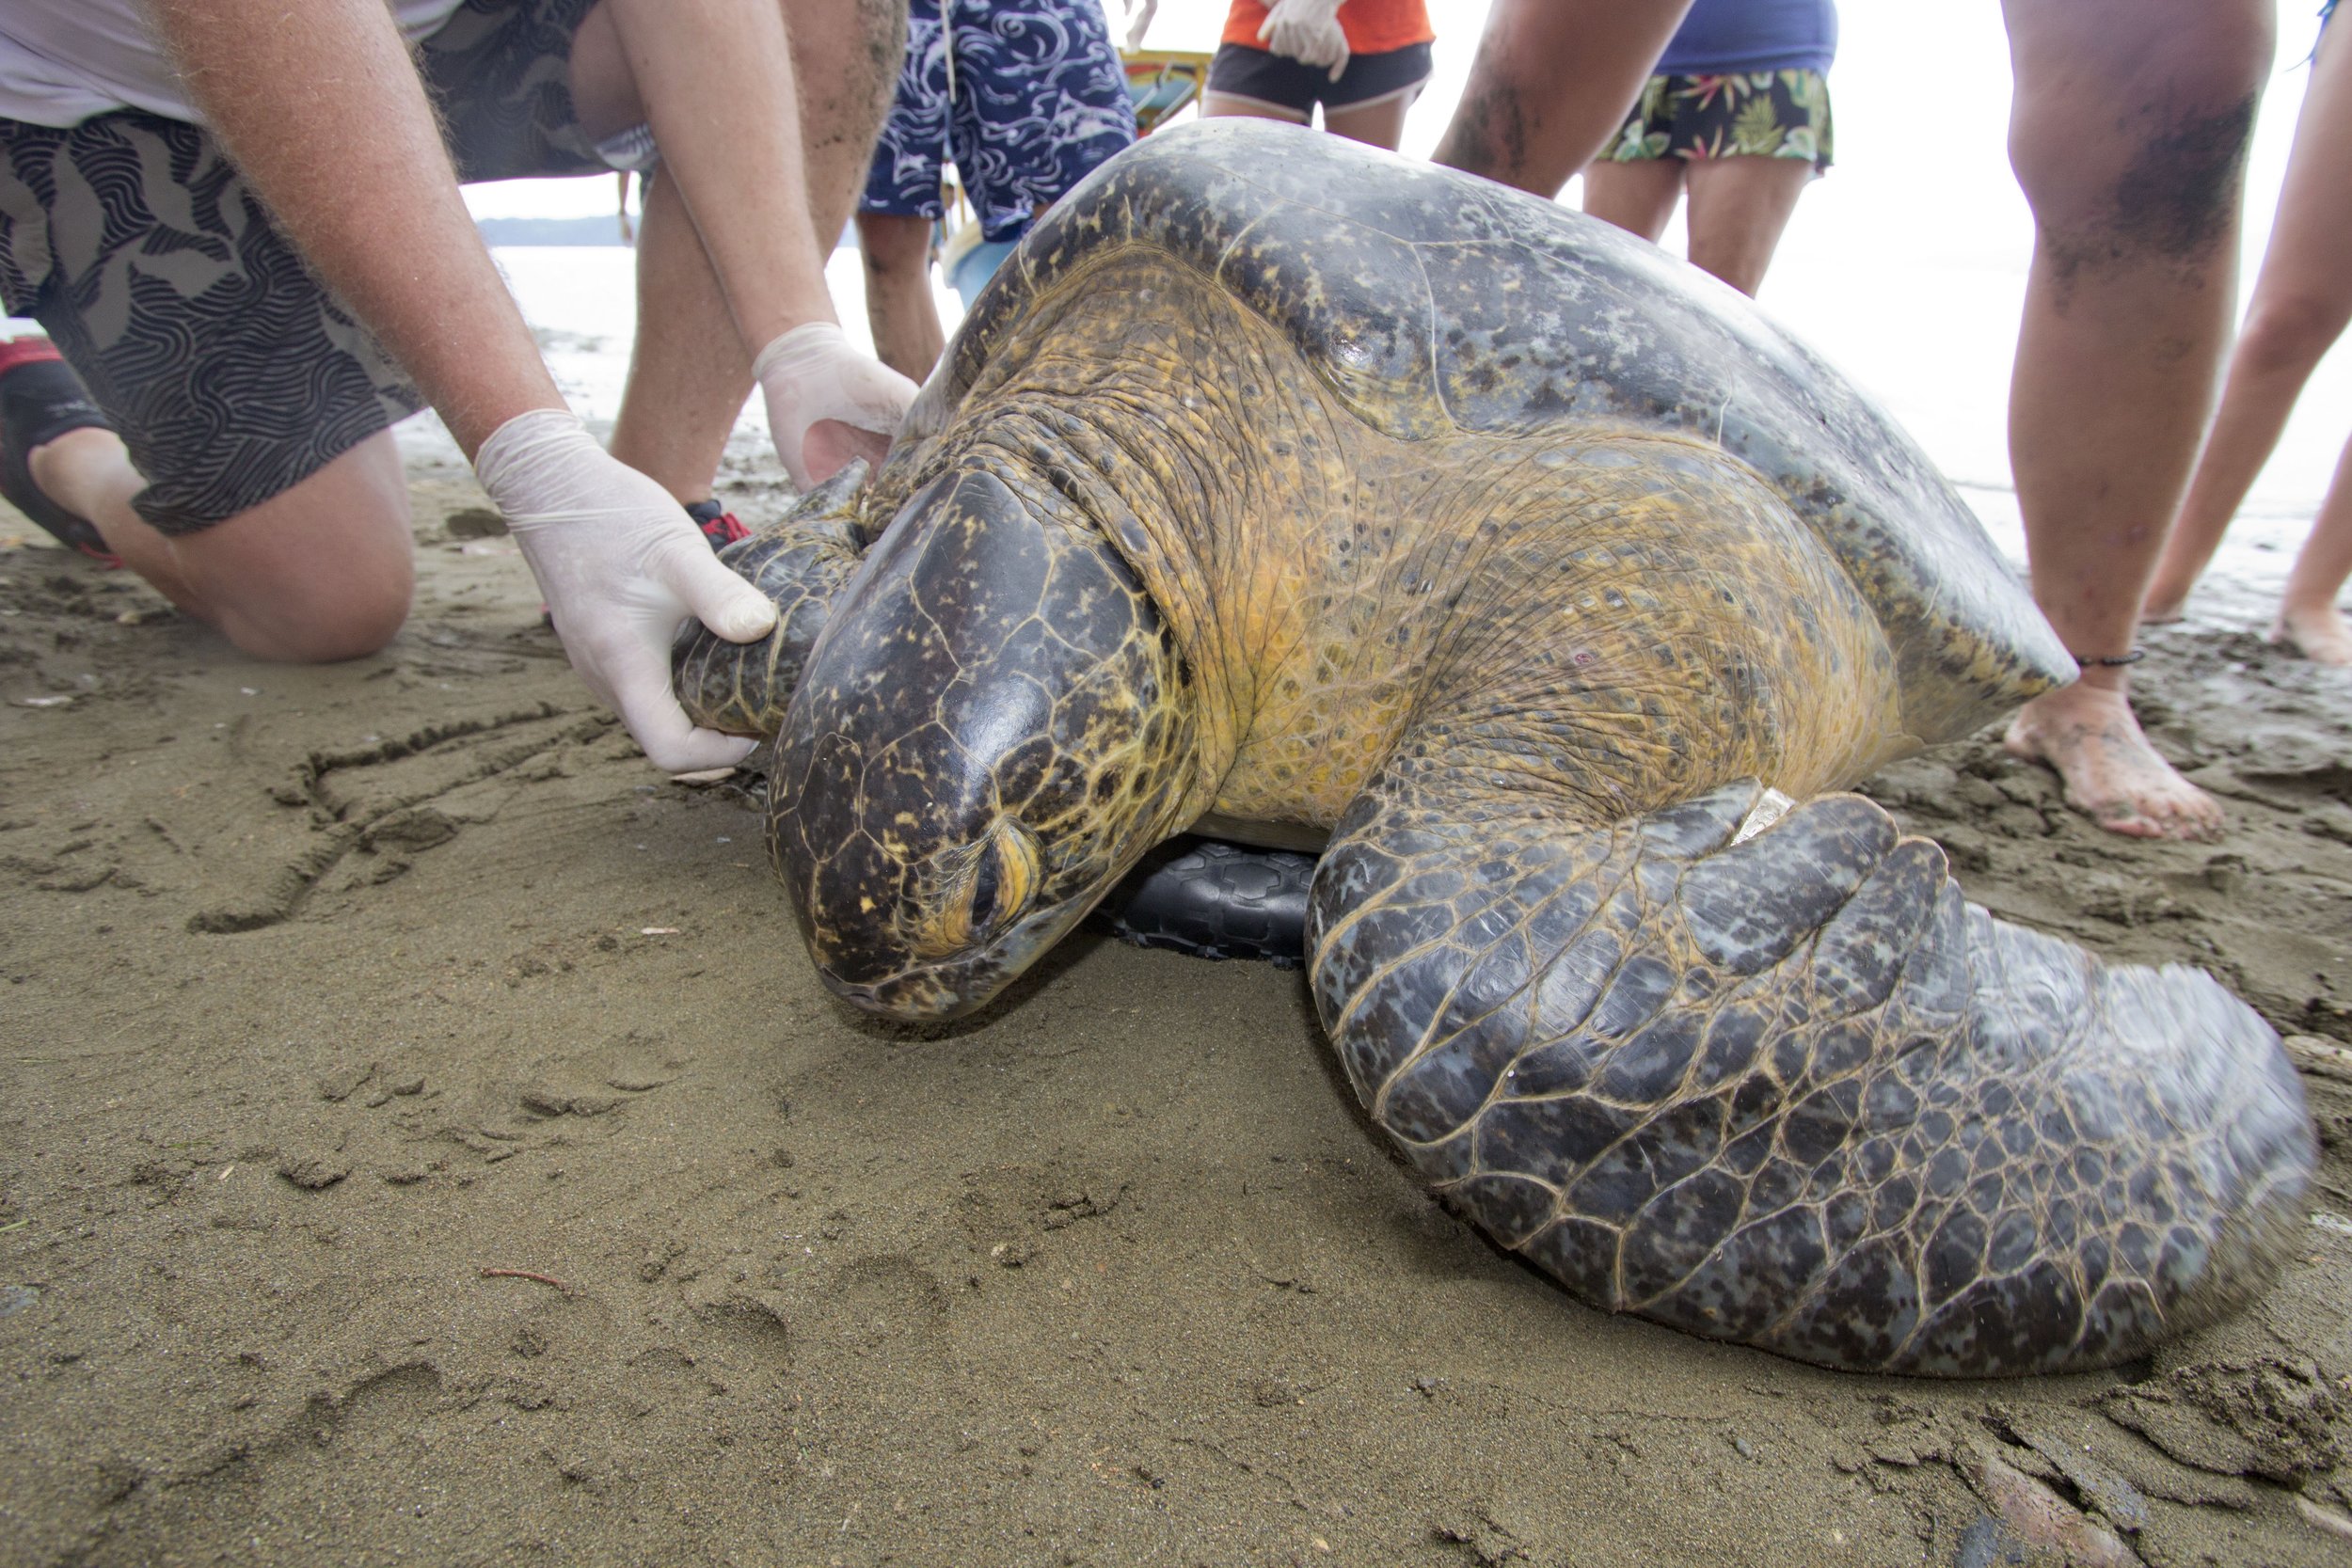 Once caught, bring the turtles to the beach to study and release